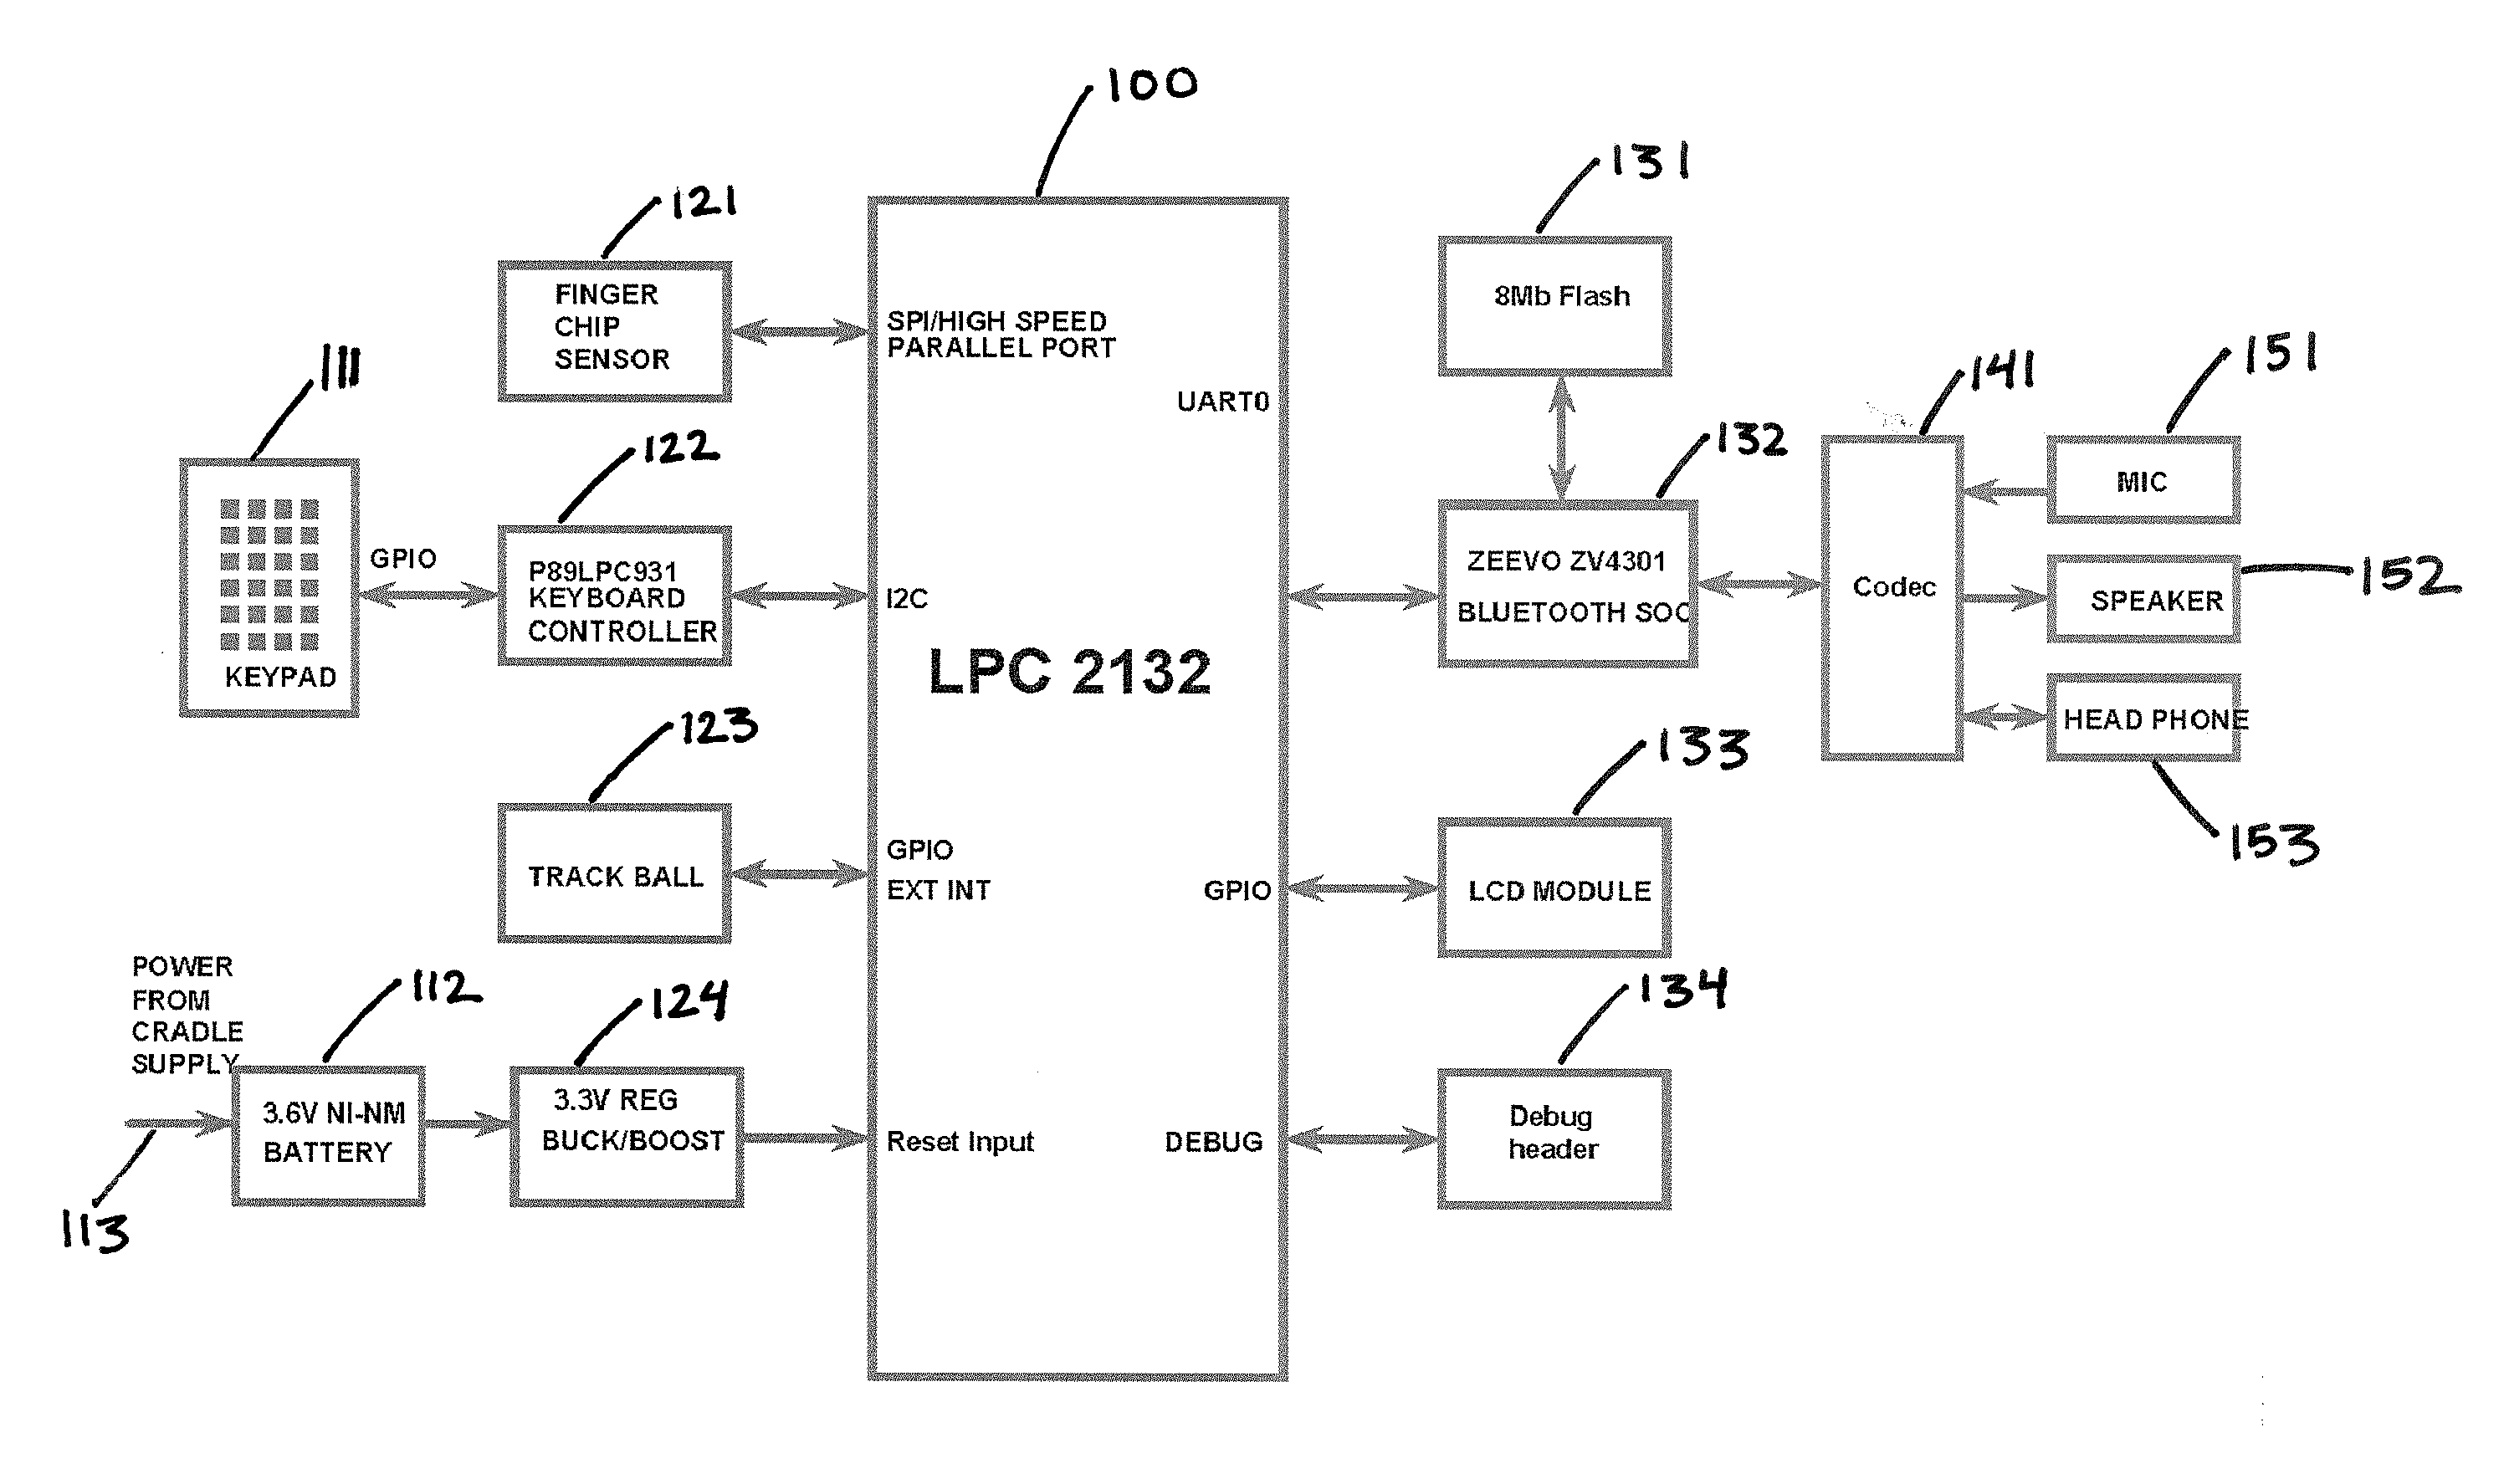 Tethered Digital Butler Consumer Electronic Device and Method